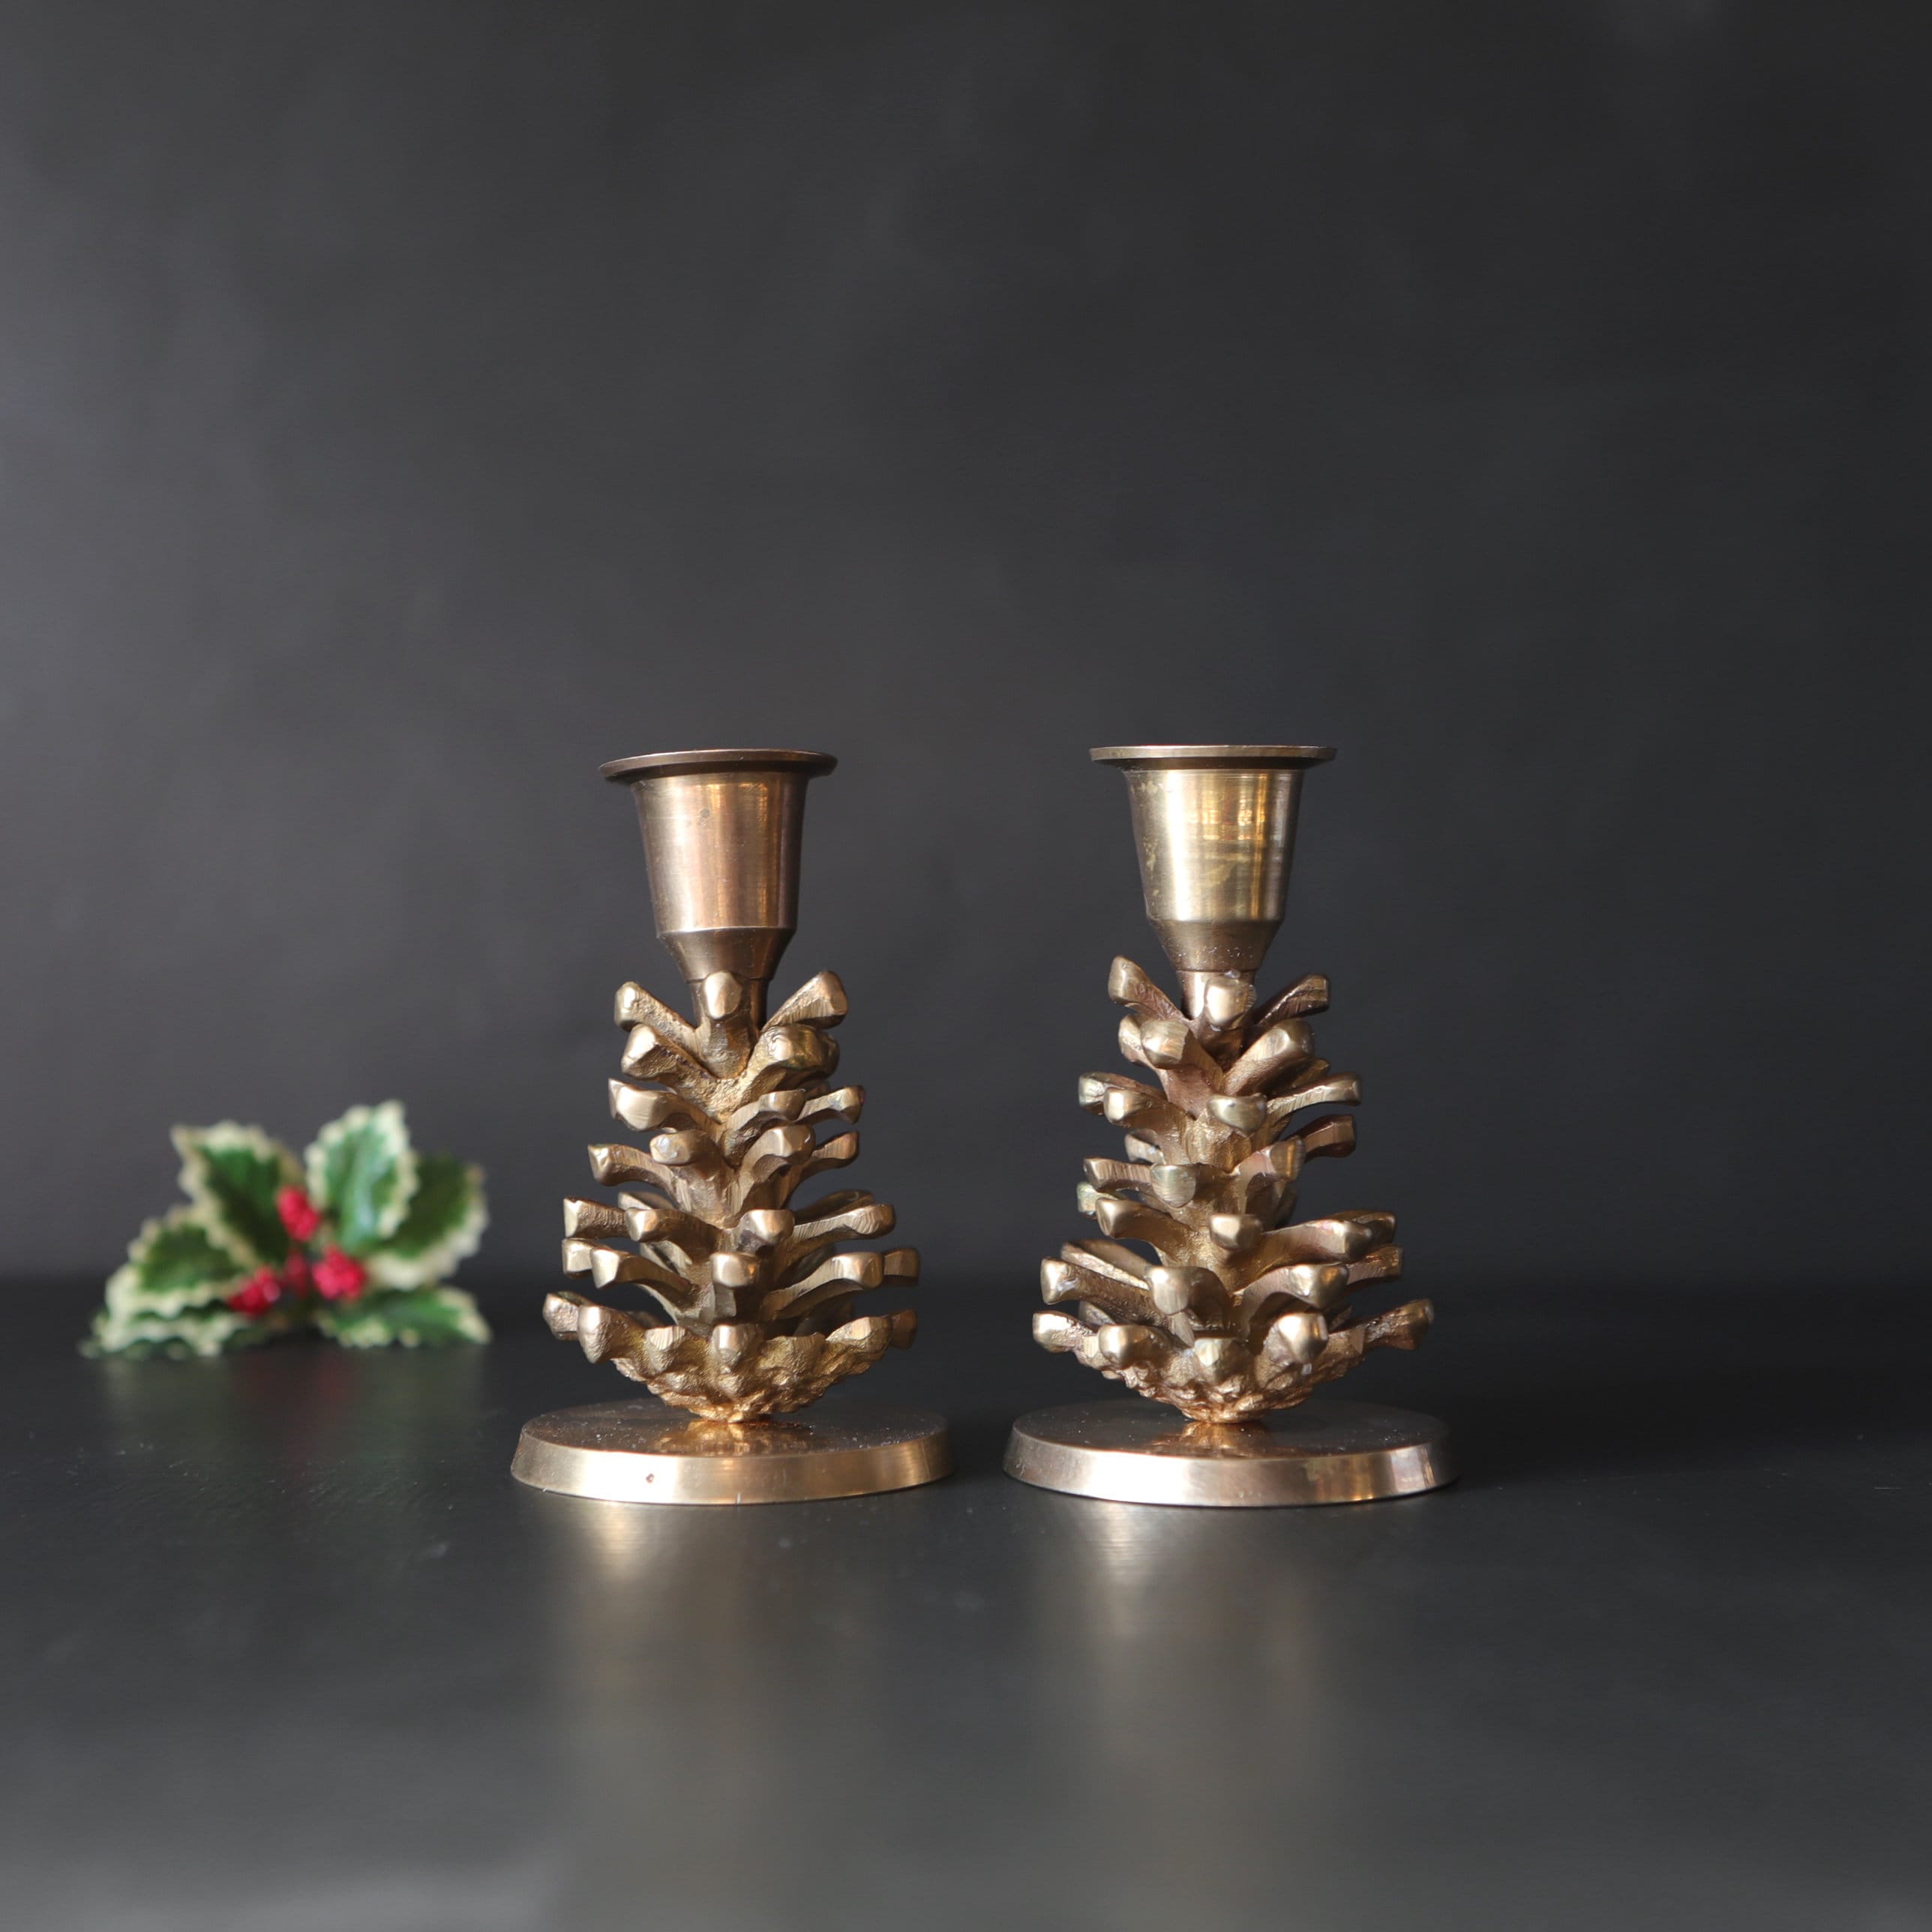 2x Brass Pinecone Candlesticks Vintage Pine Cone Candle Holders